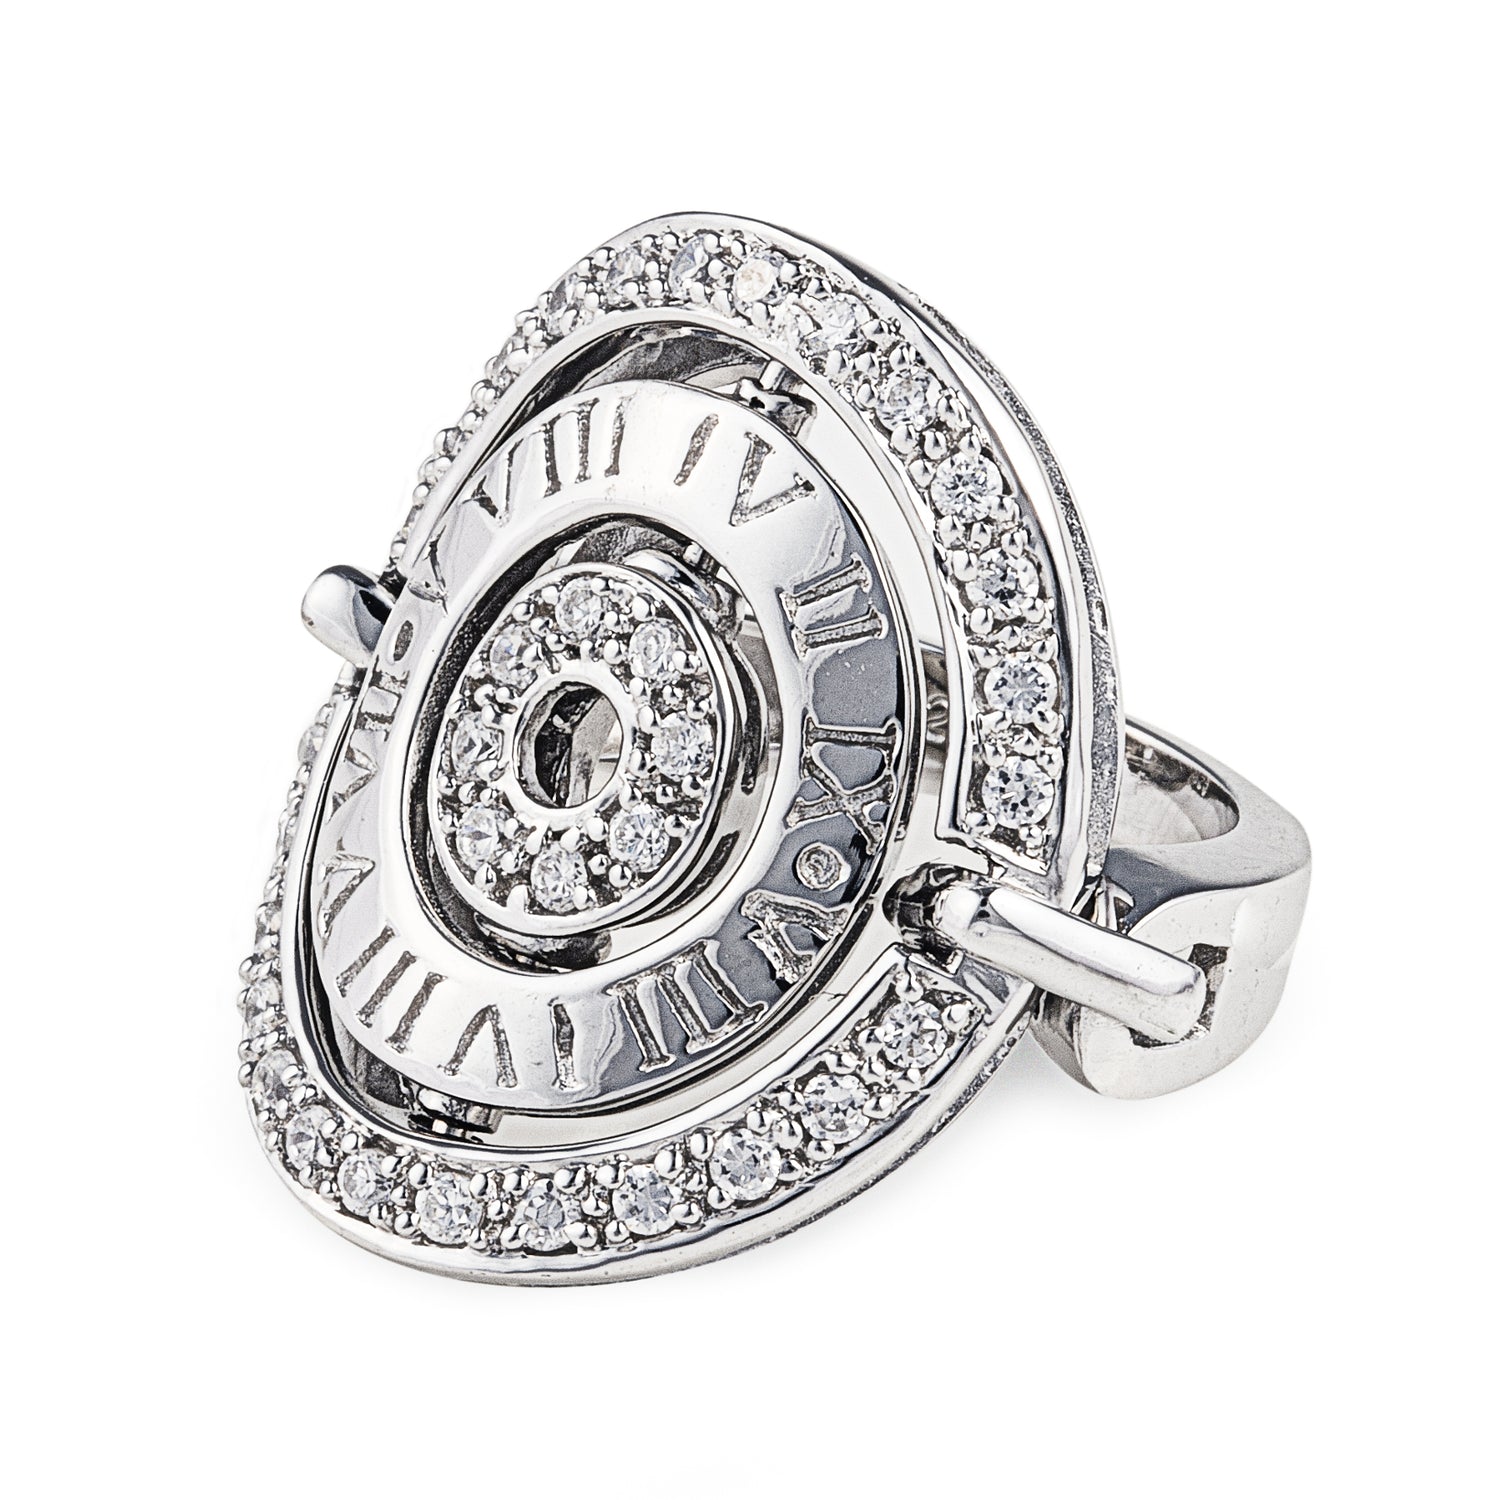 The Juicy Ring is eye-catching, edgy & modern. Made of 925 sterling silver with moving parts for comfort. Encrusted with cubic zirconia stones and Roman Numerals. Jewellery by Bellagio & Co. Worldwide shipping.